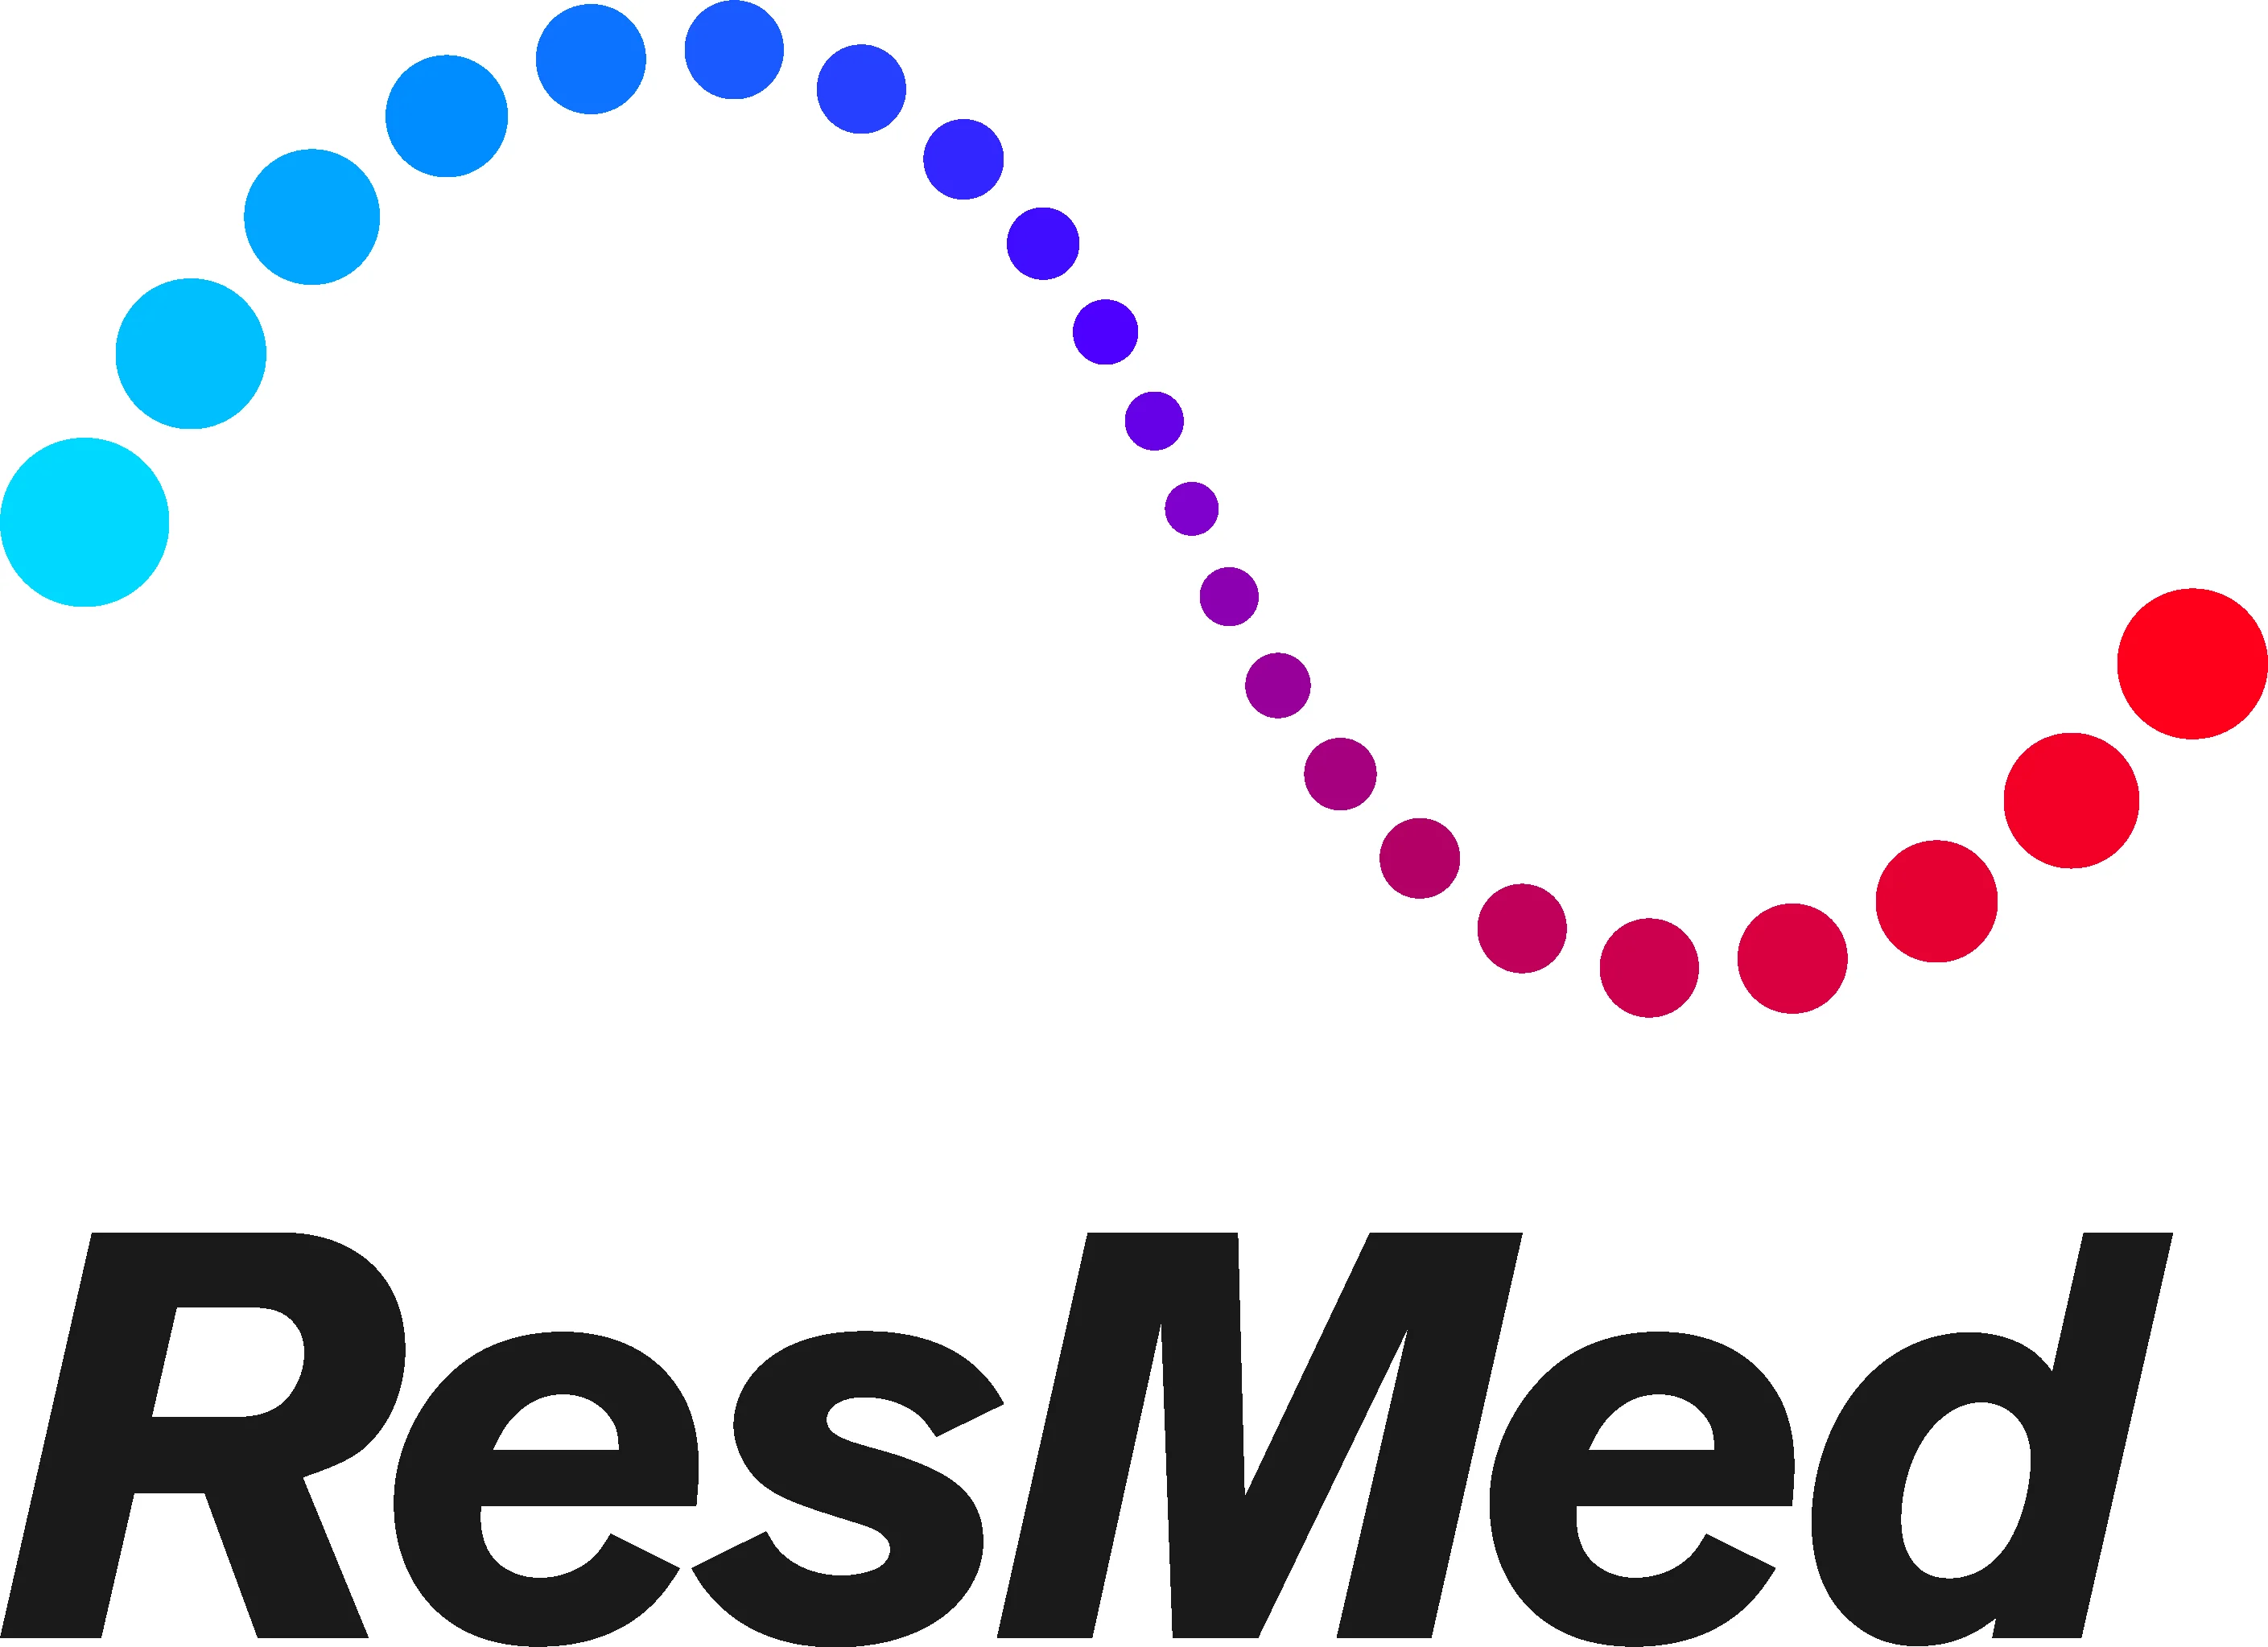 ResMed Germany Inc.